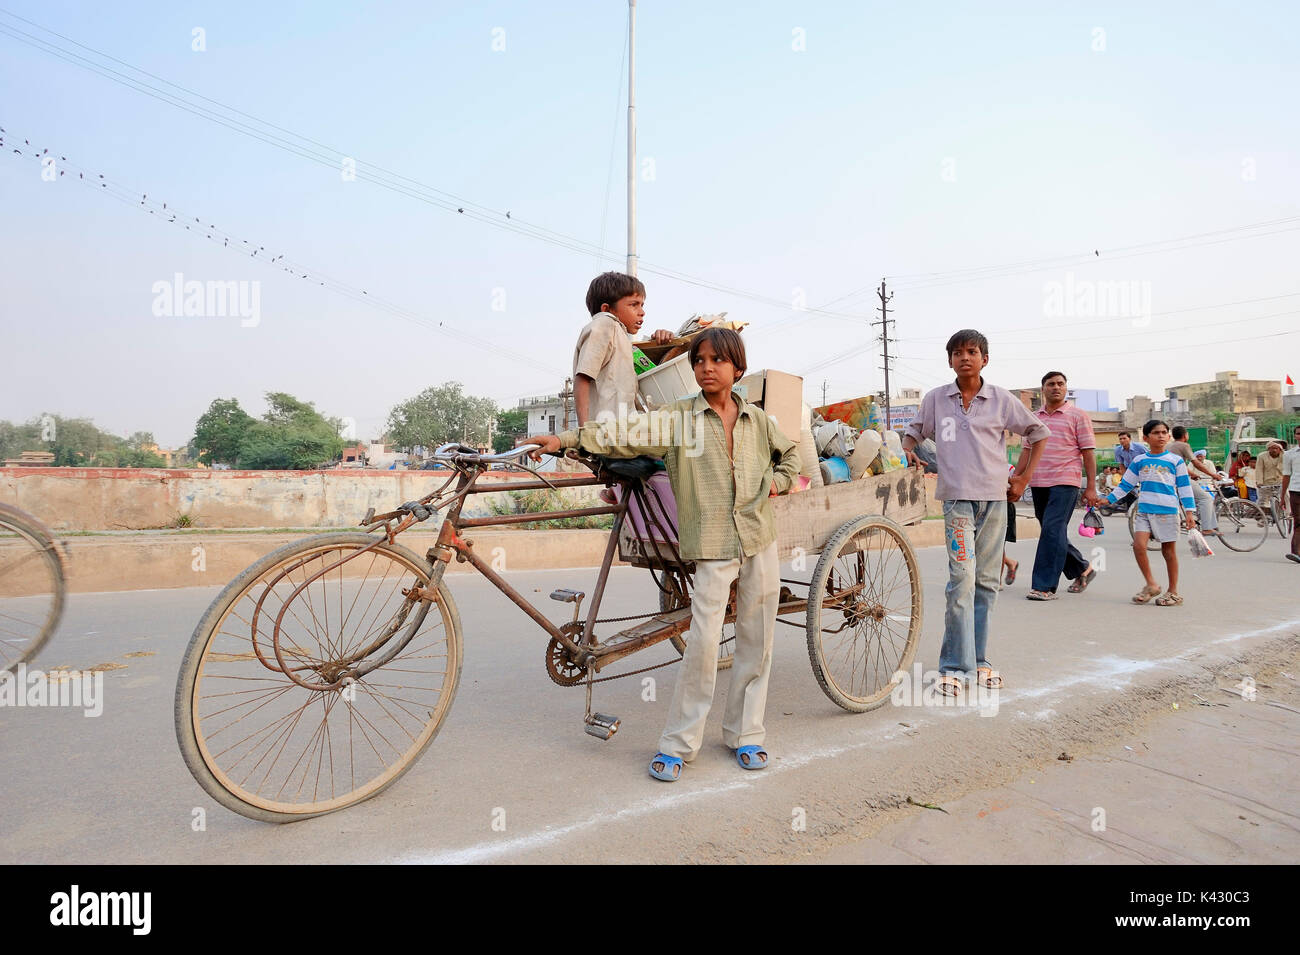 Children with bicycle, Bharatpur, Rajasthan, India | Kinder mit Fahrrad, Bharatpur, Rajasthan, Indien Stock Photo